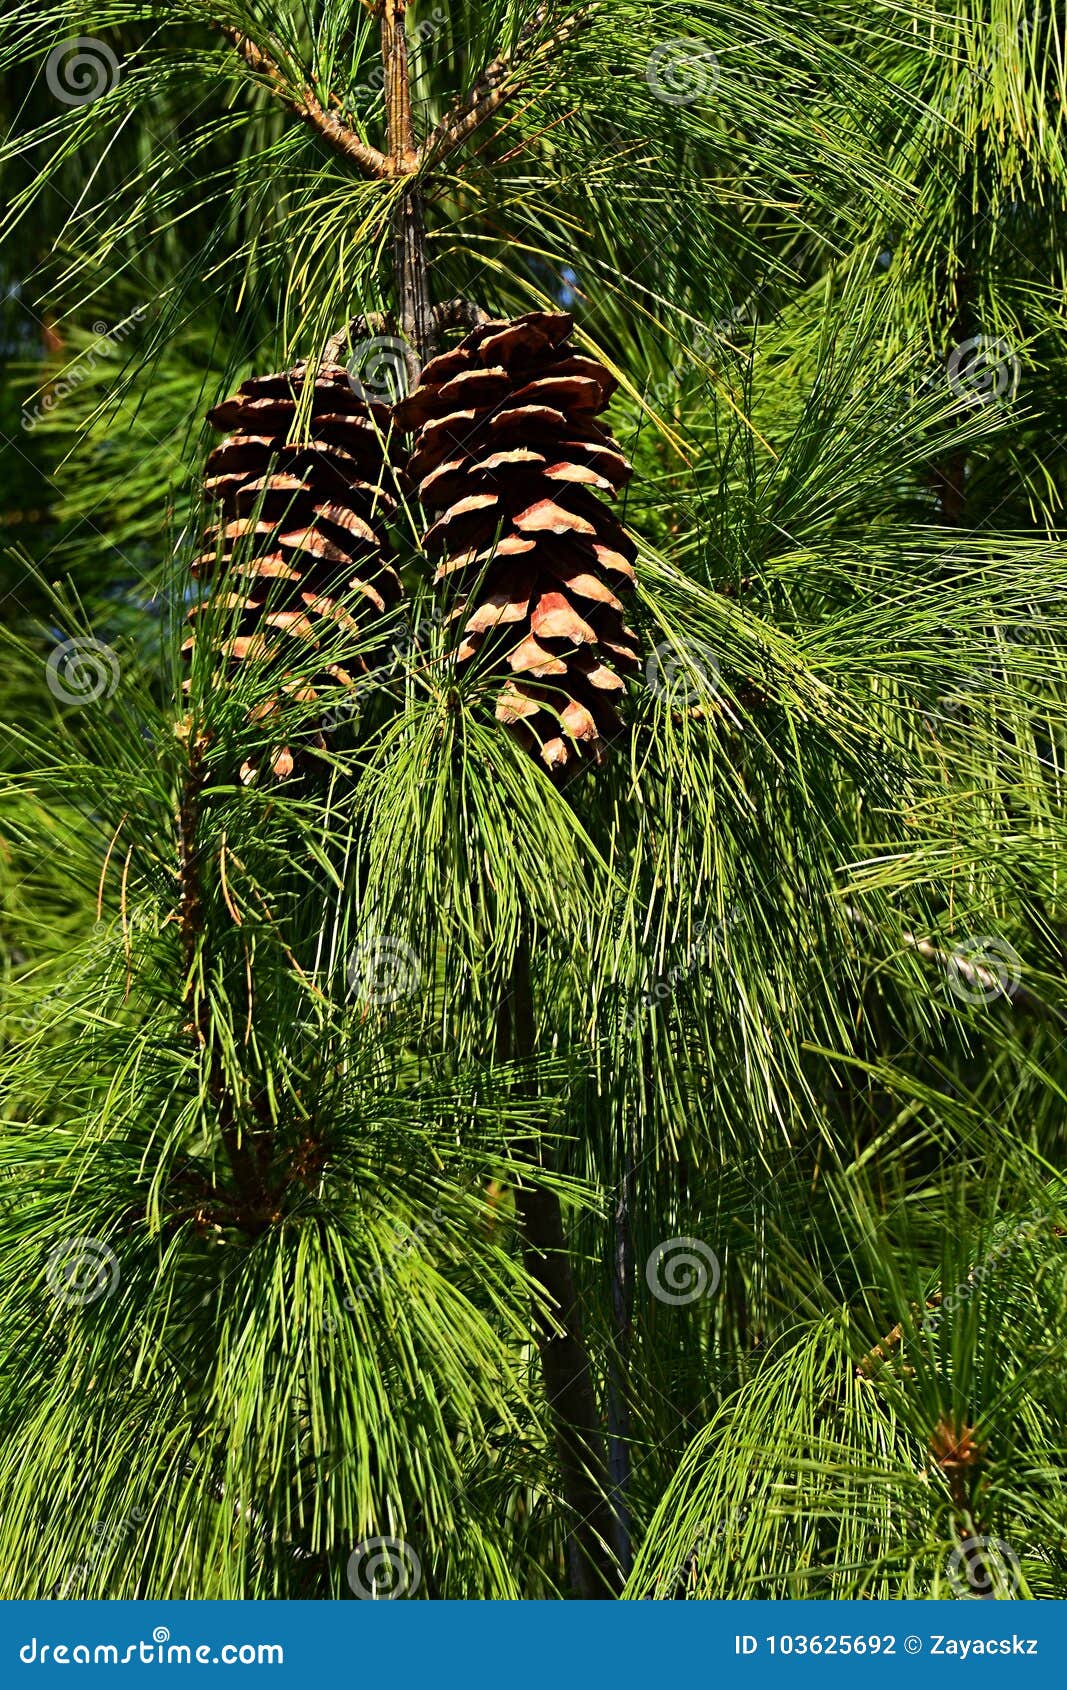 two large cones hidden in pine pinaceae tree needles dense foliage, sunbathing in late fall sunshine